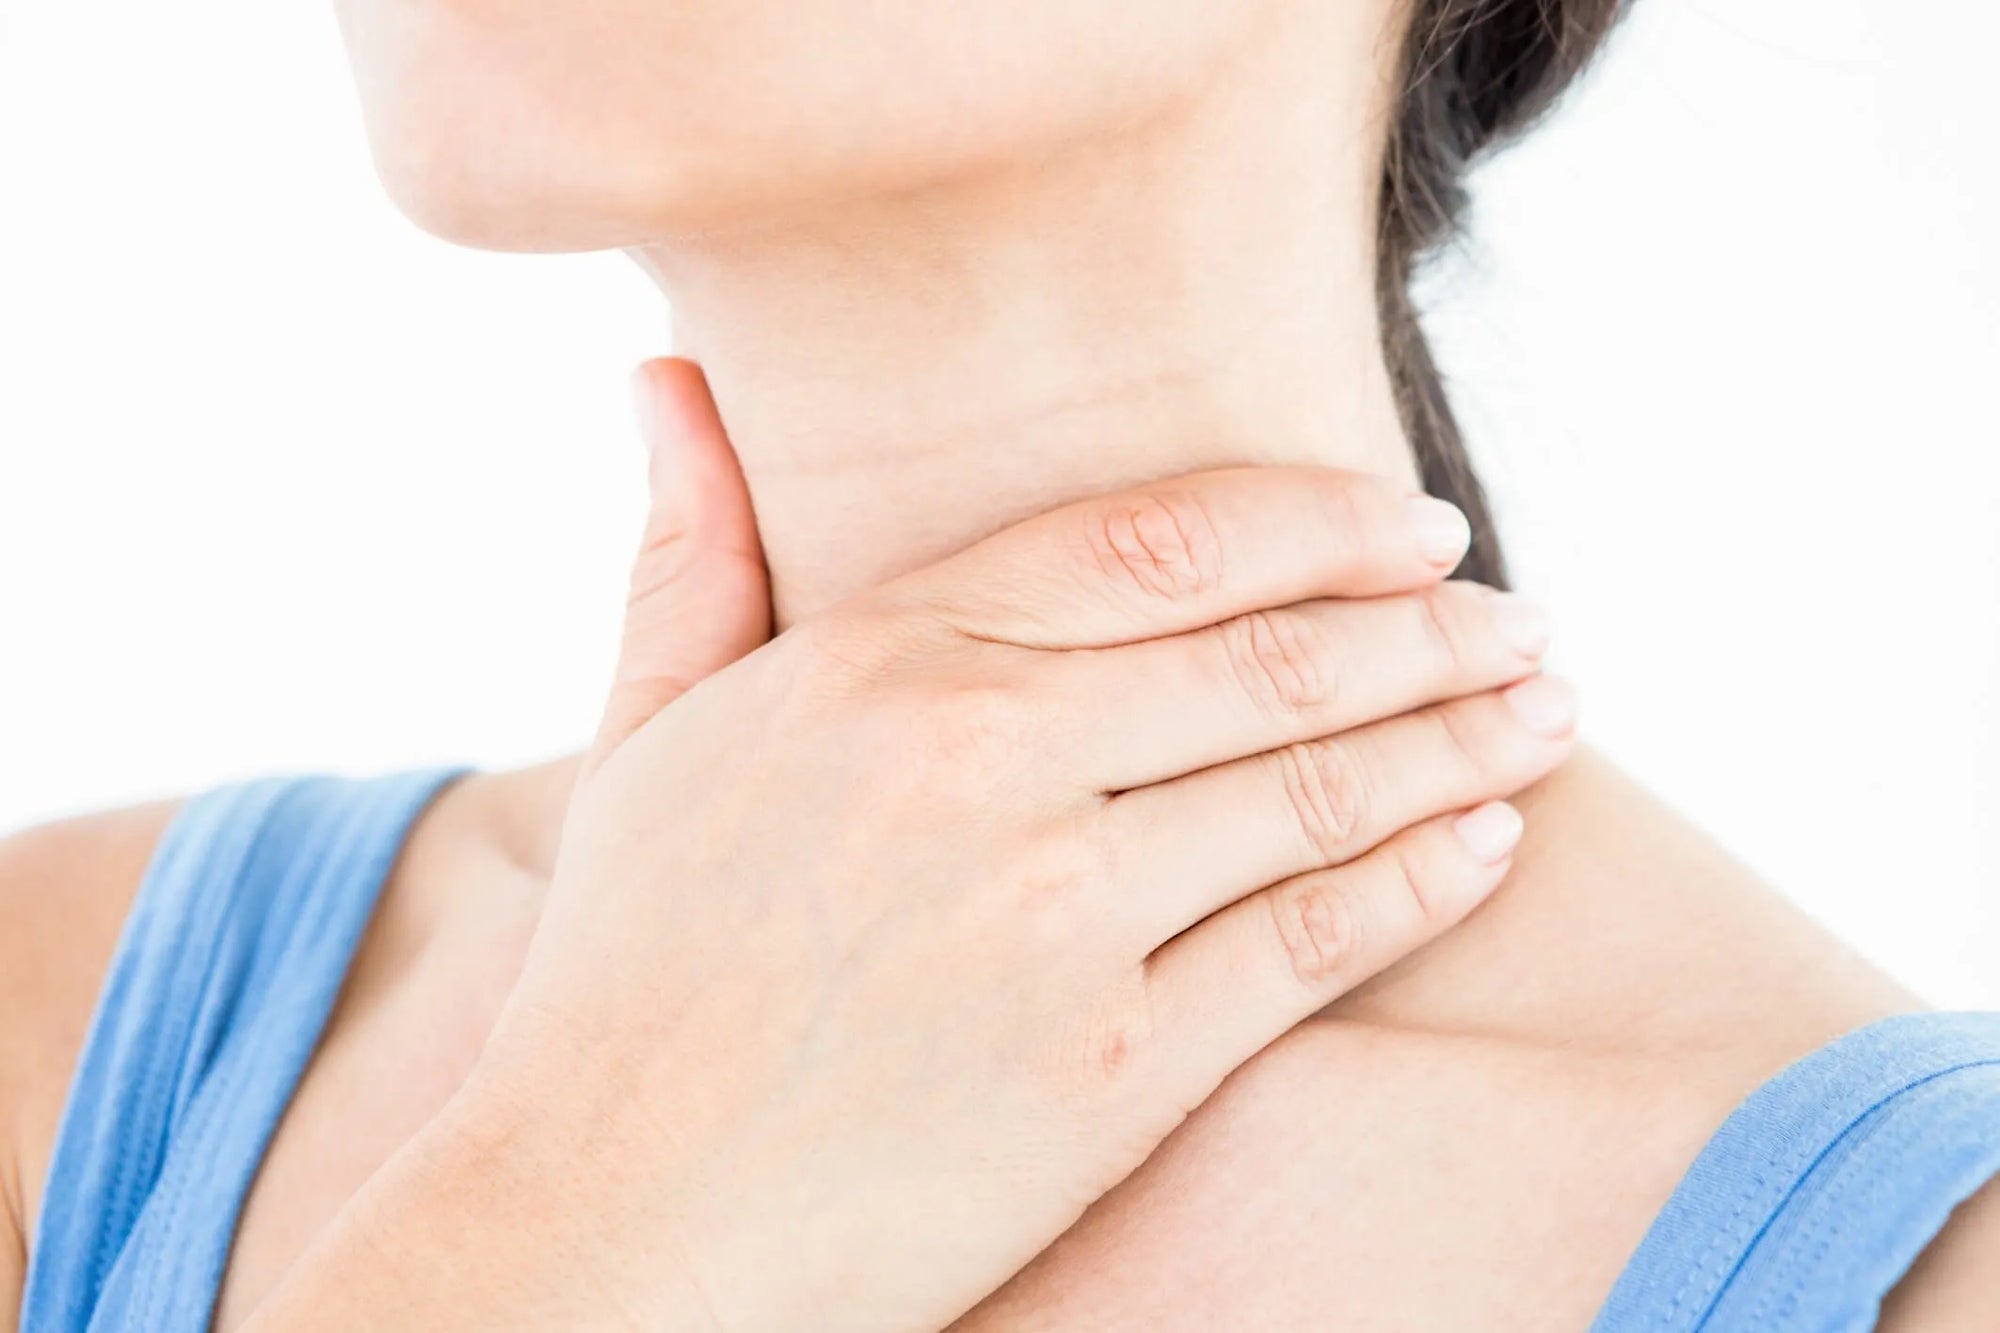 A quick and simple 3-step treatment for hoarseness